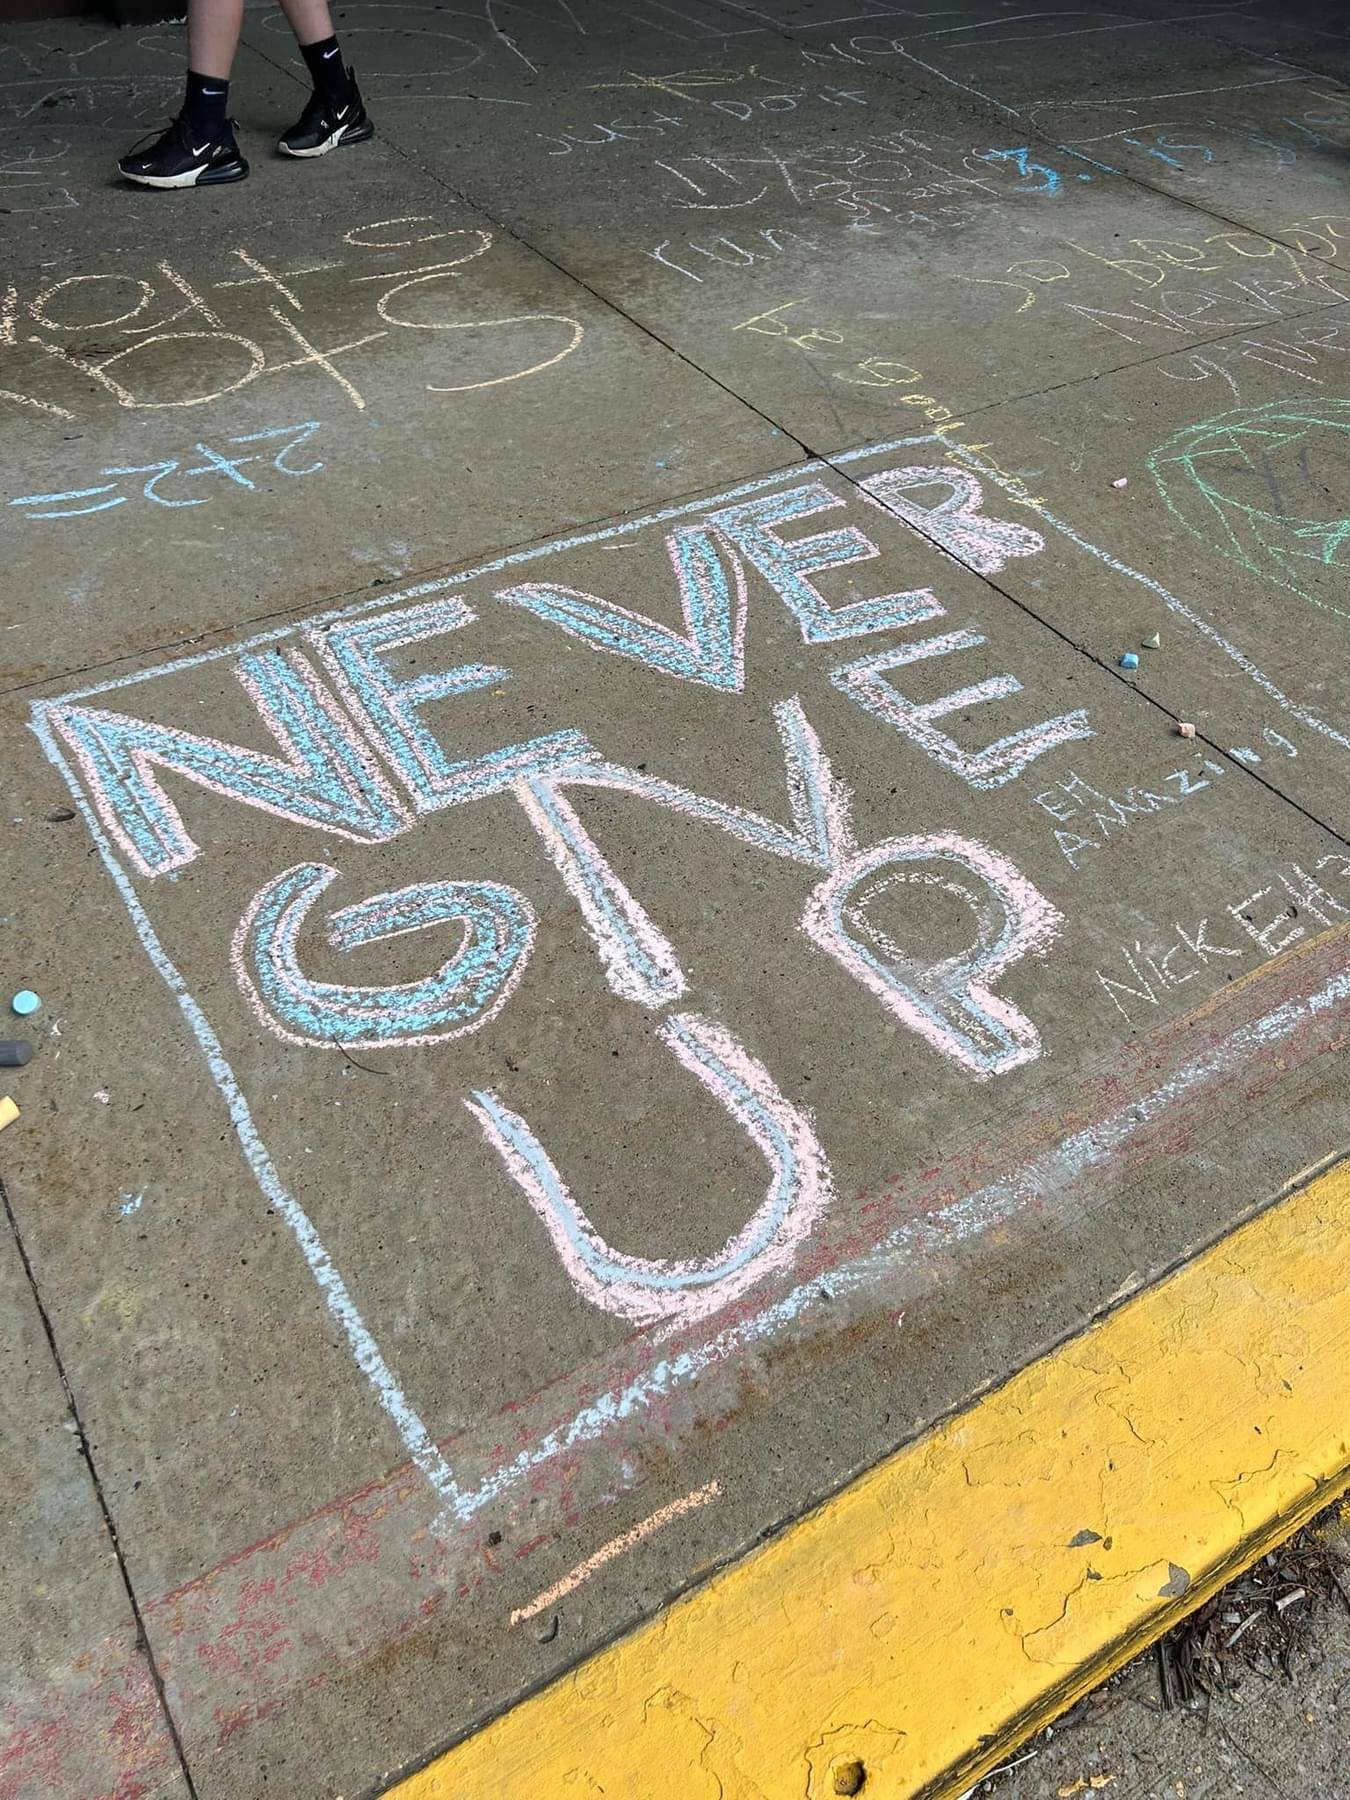 Chalk sign “Never Give Up”.